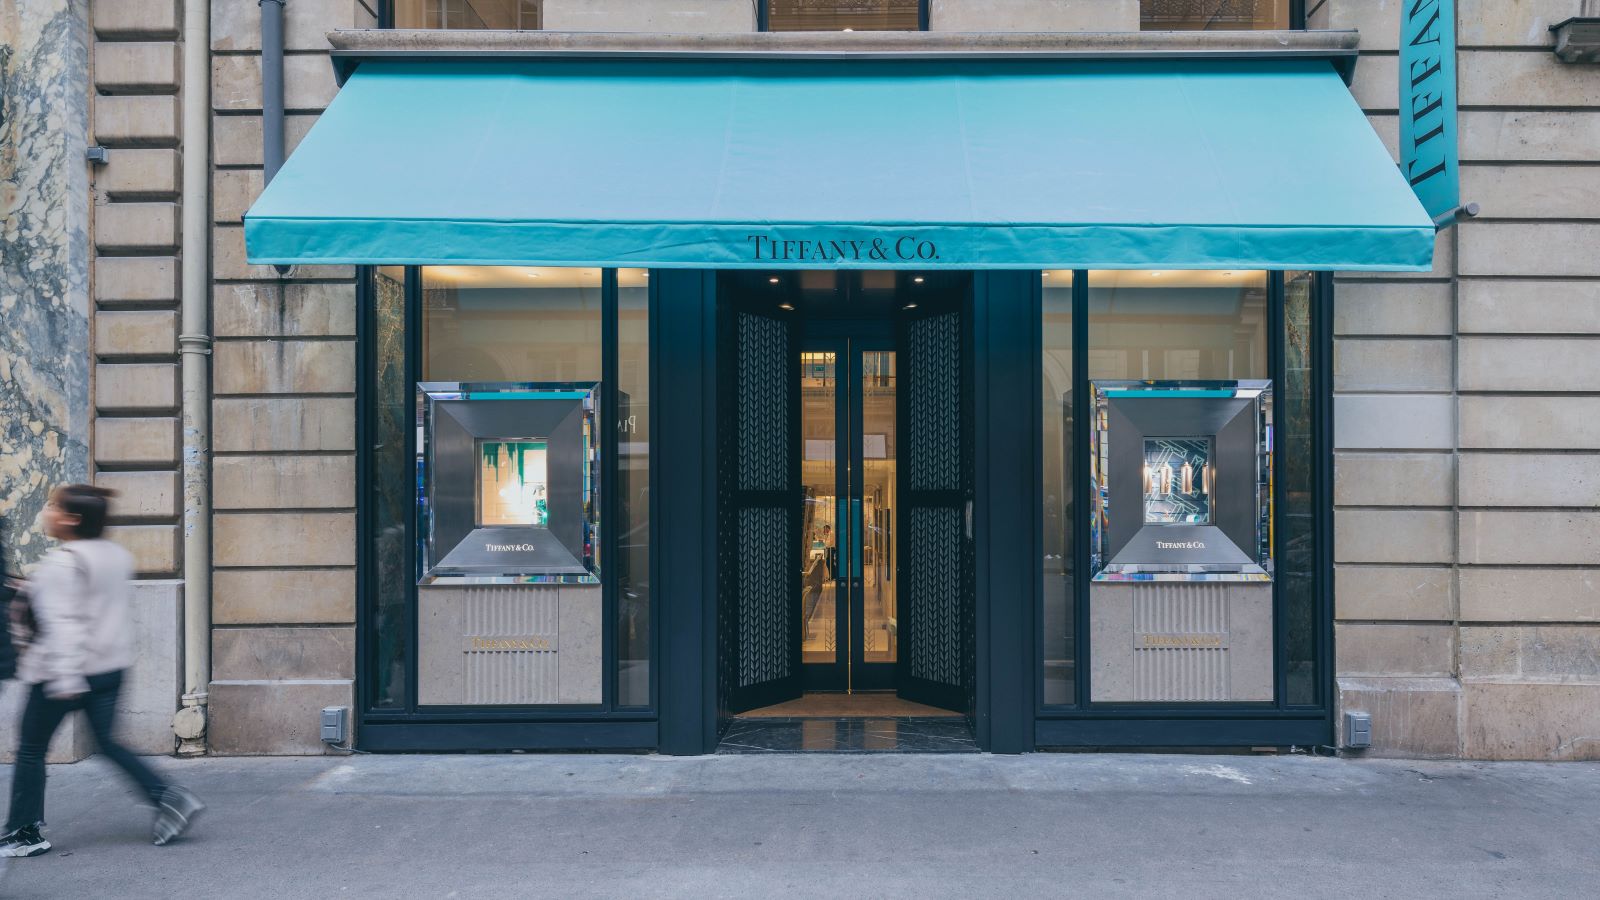 Tiffany & Co Retail Store Front - Mace Group